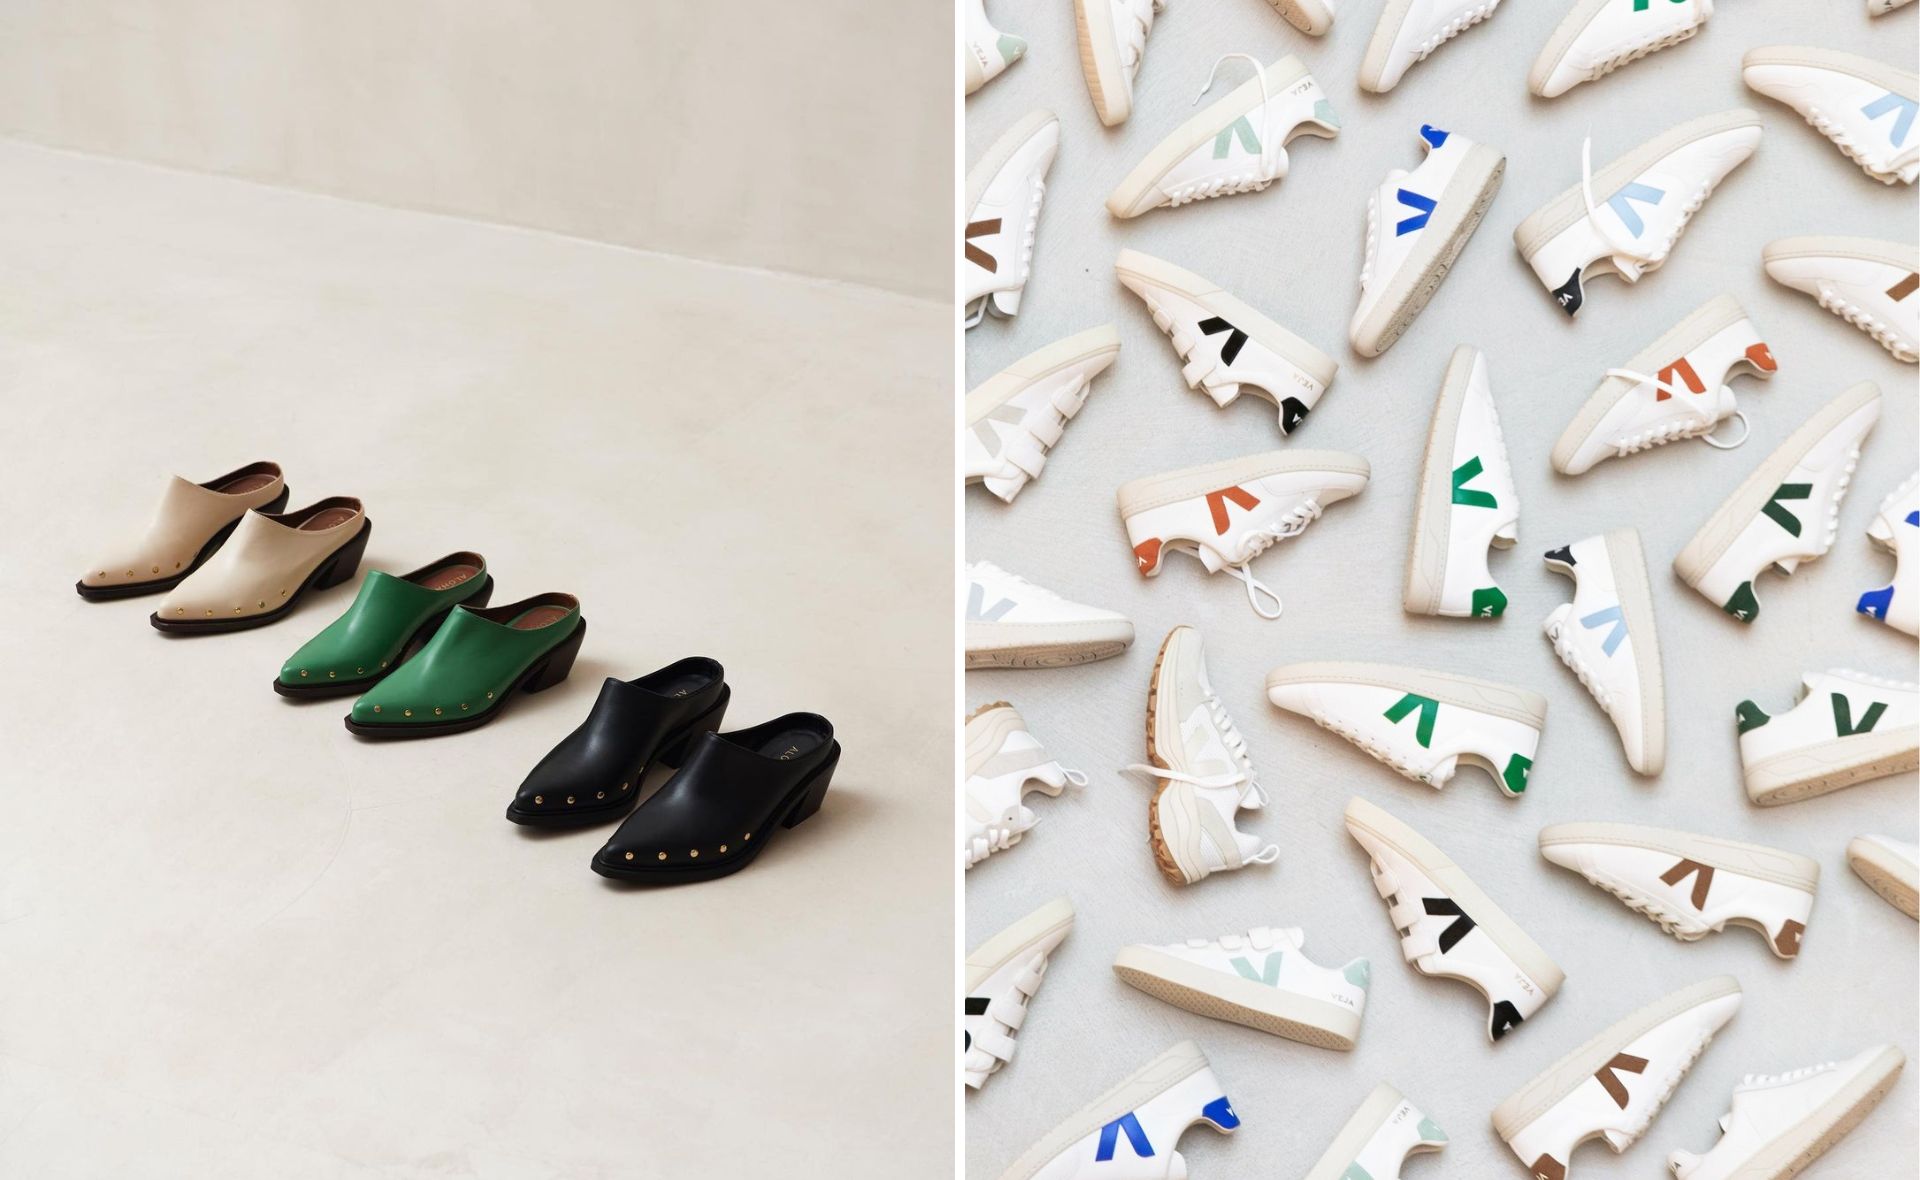 Step into the future with these chic sustainable footwear brands